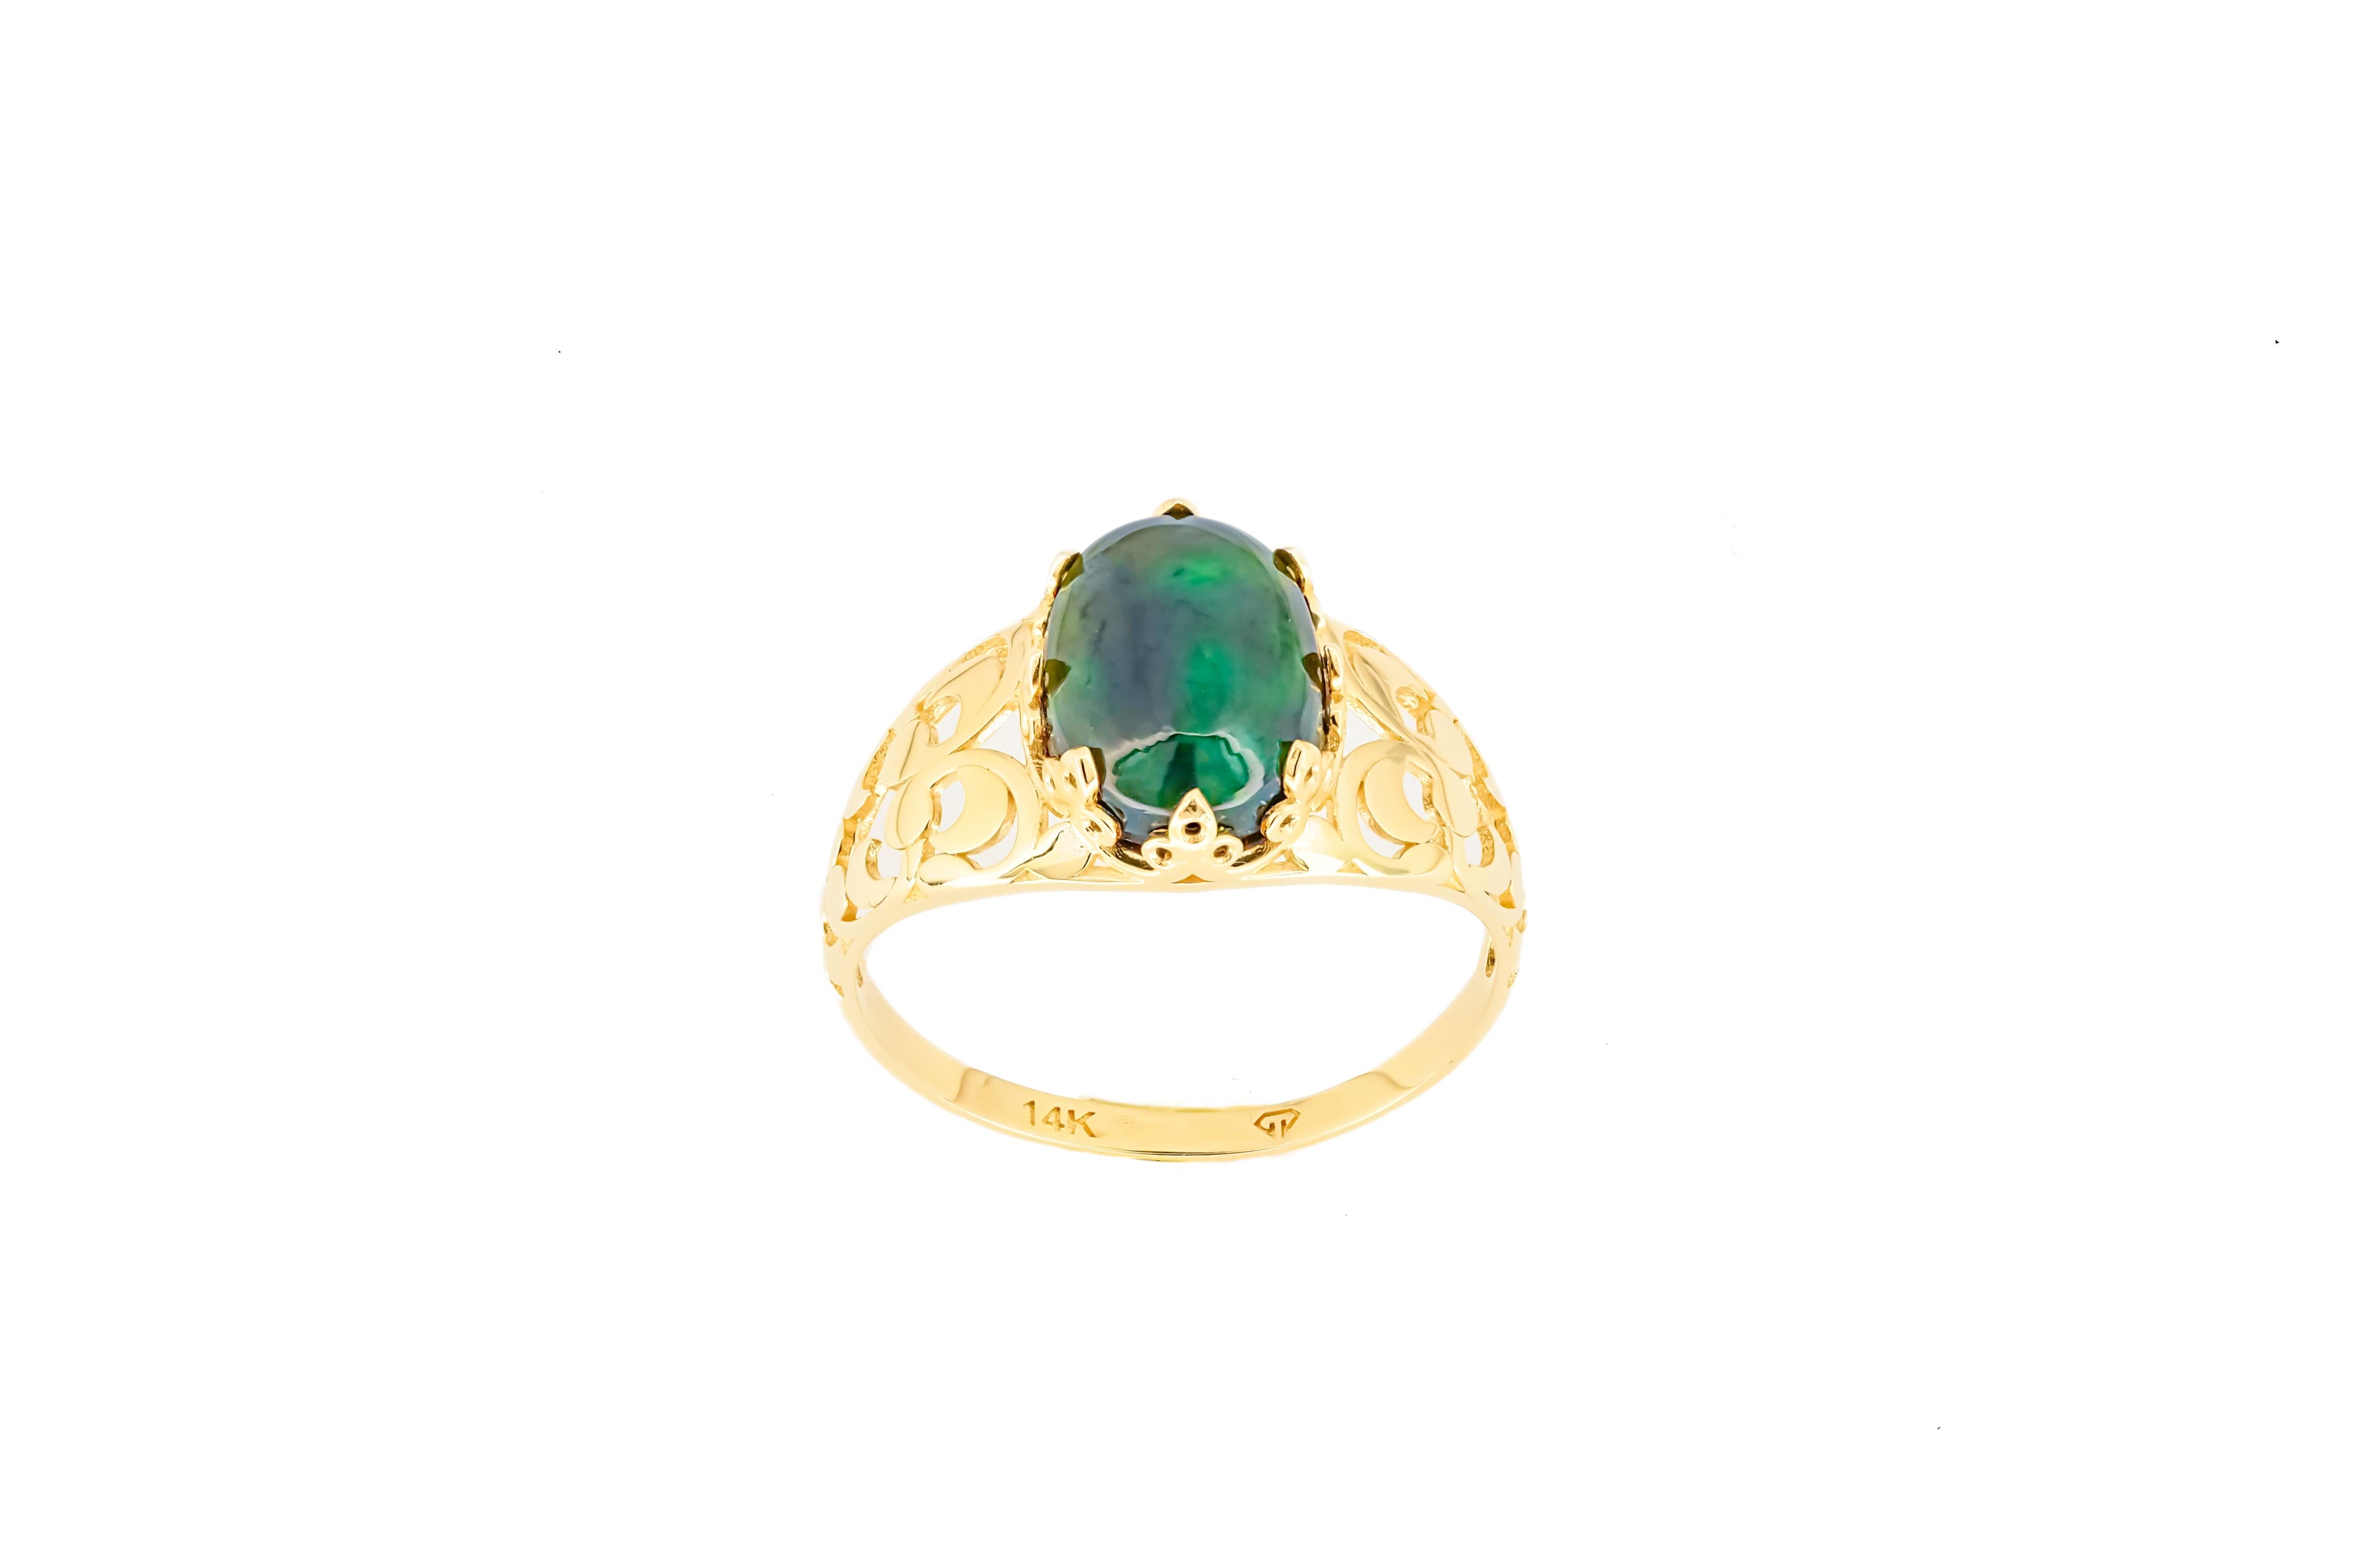 For Sale:  Black Opal Vitage Style Ring in 14 Karat Gold, Ethiopian Opal Cabochon Ring 8